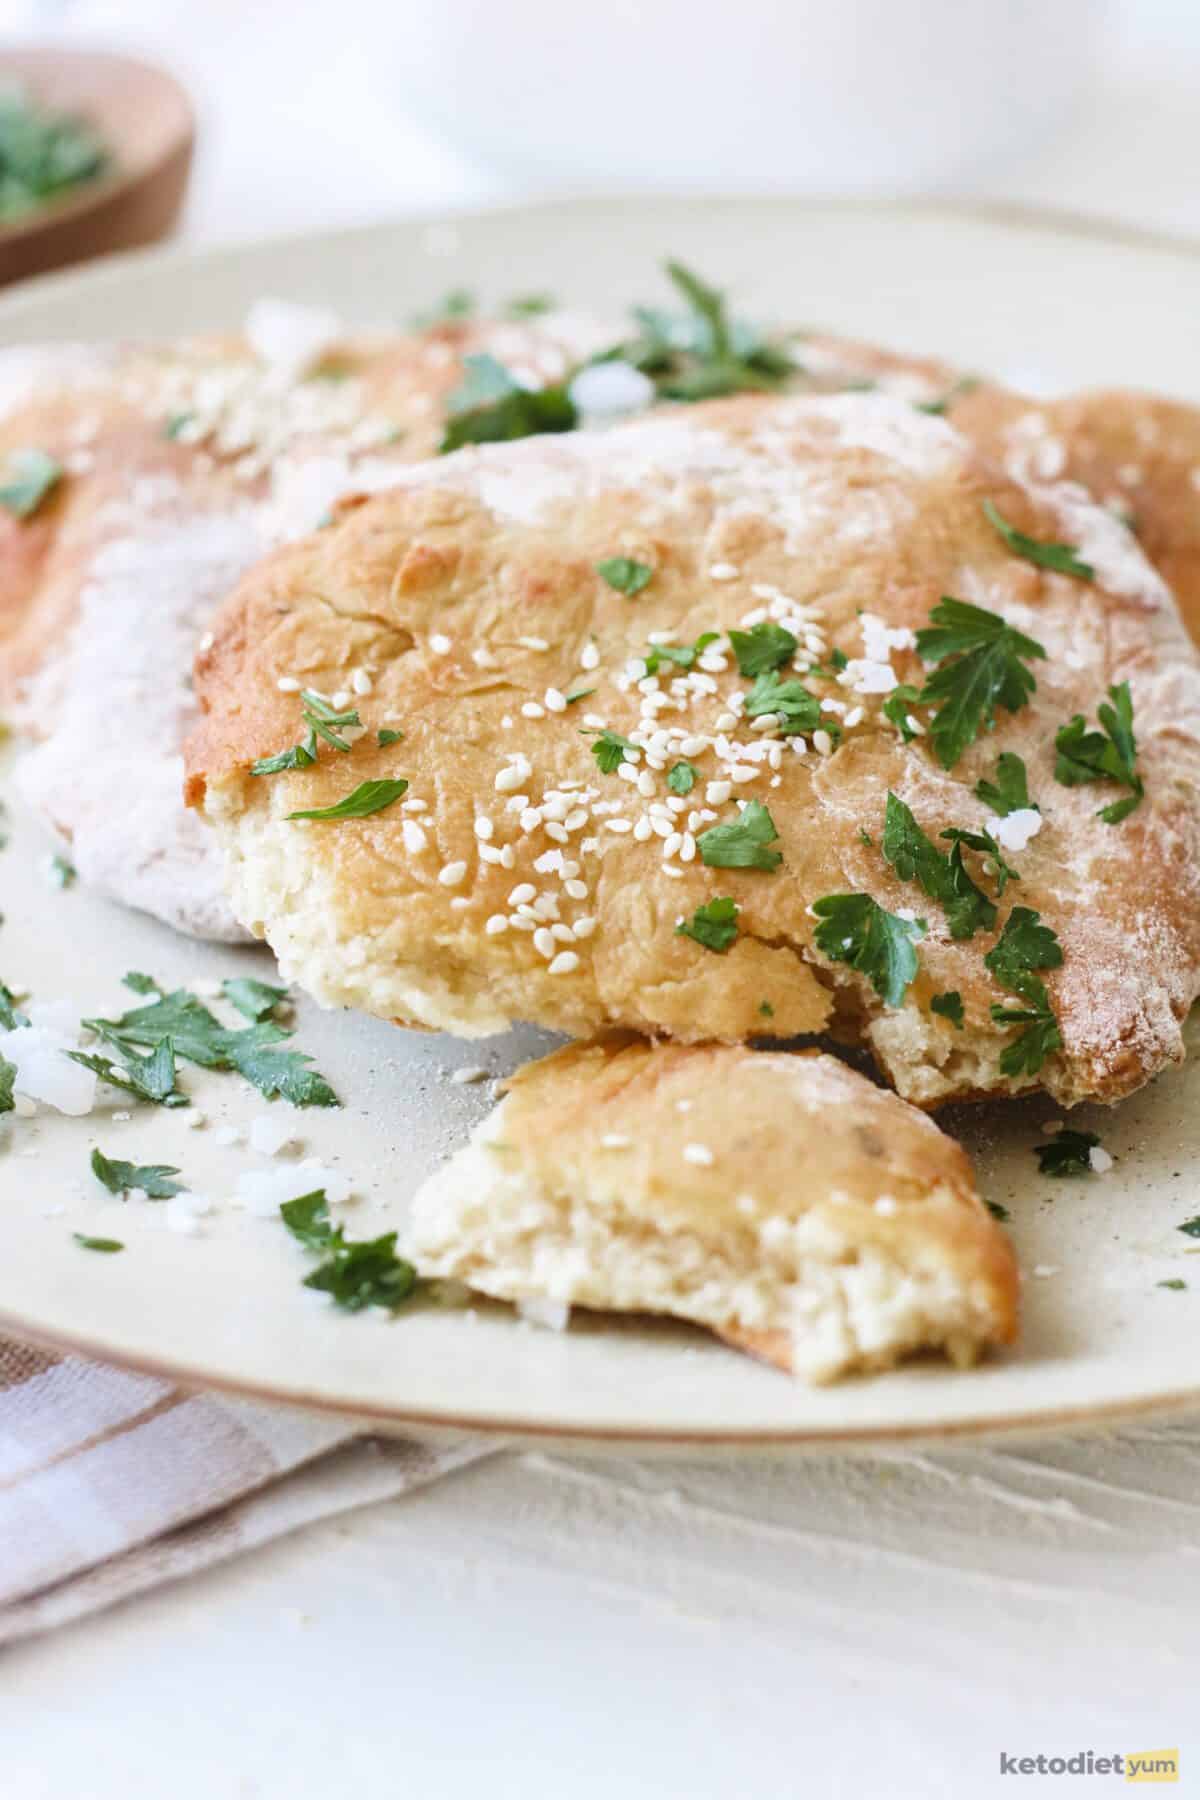 Delicious low carb naan bread brushed with olive oil and sprinkled with sea salt, sesame seeds and chopped parsley